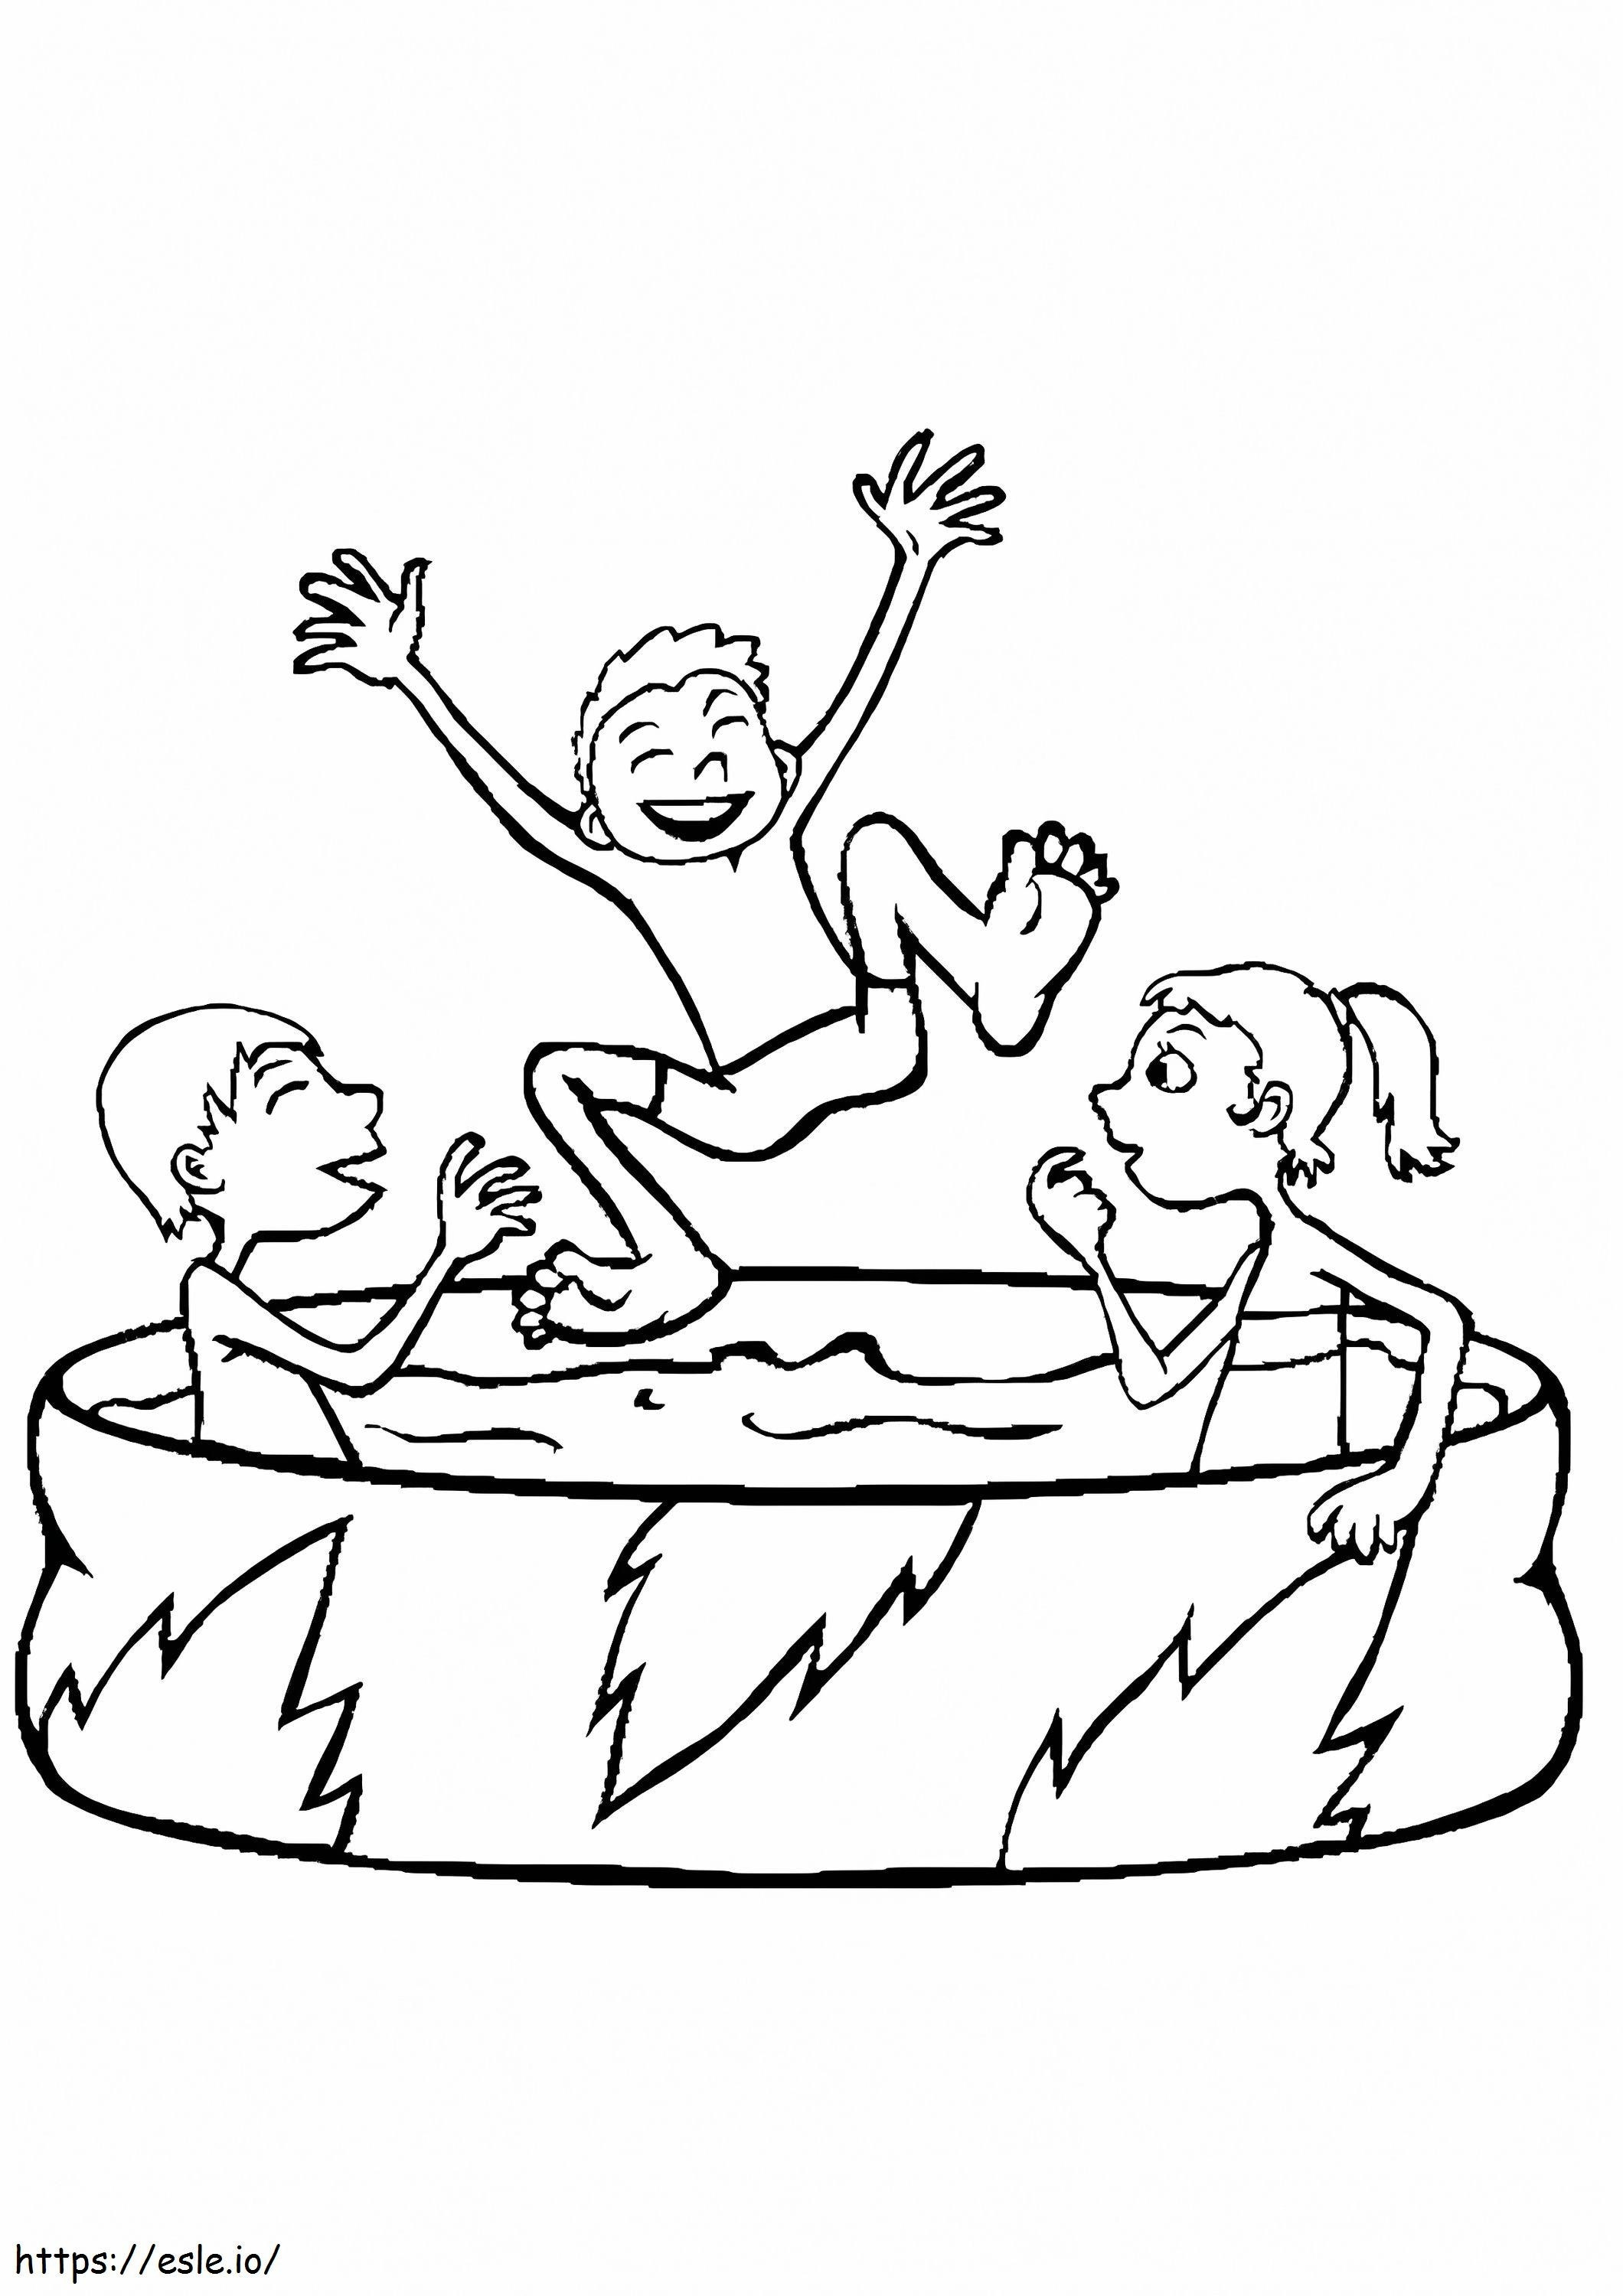 Friends In Swimming Pool coloring page